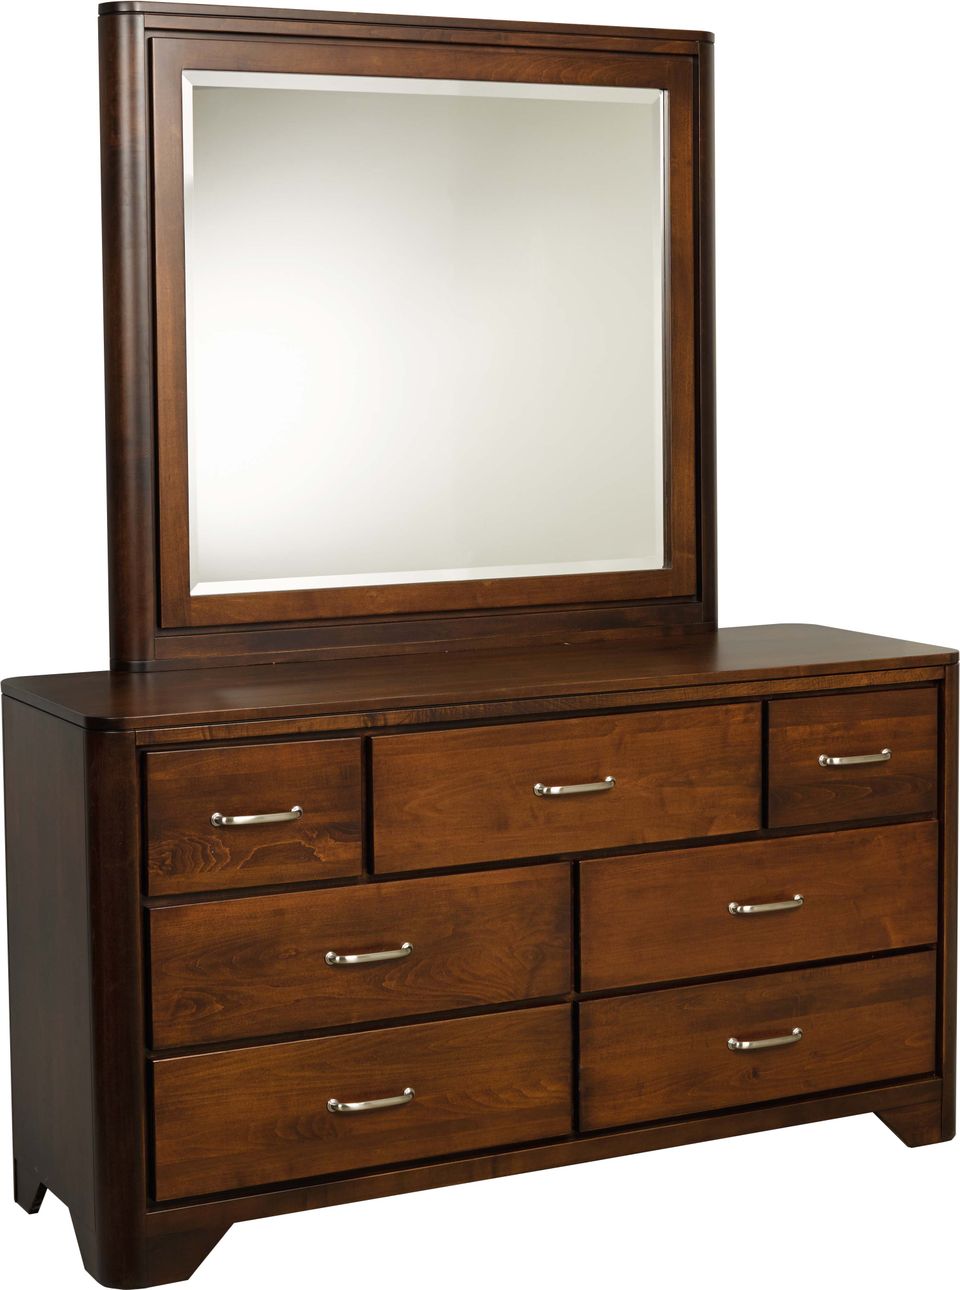 Deer london dresser with mirror   brown maple   london collection